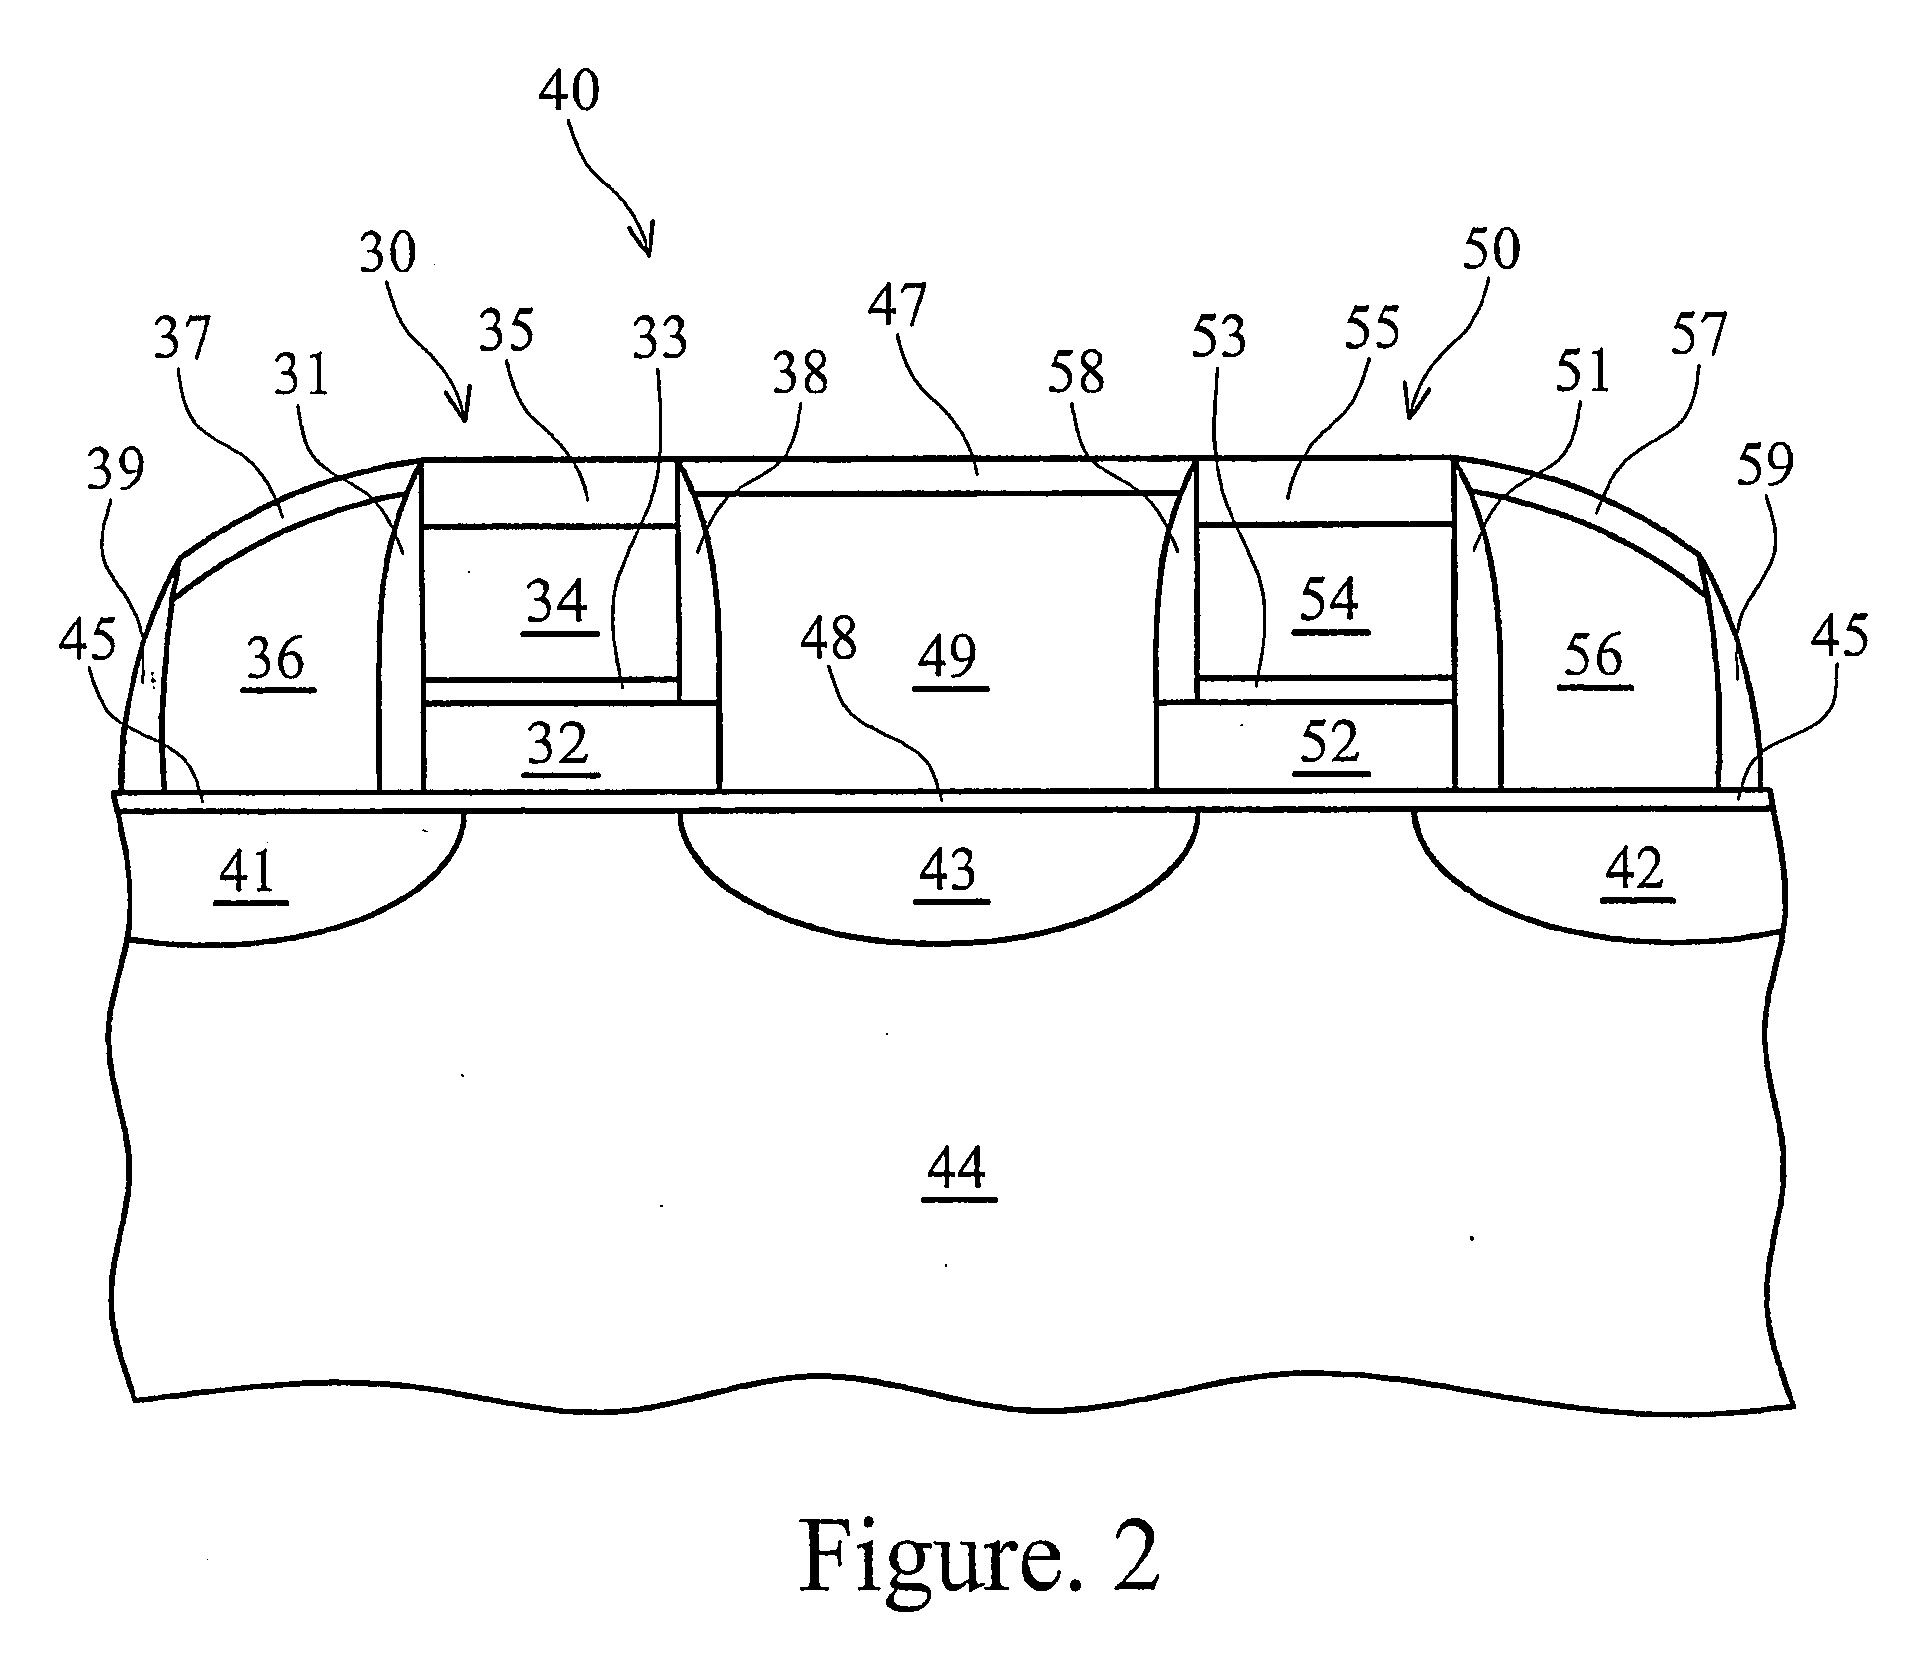 Gated semiconductor device and method of fabricating same